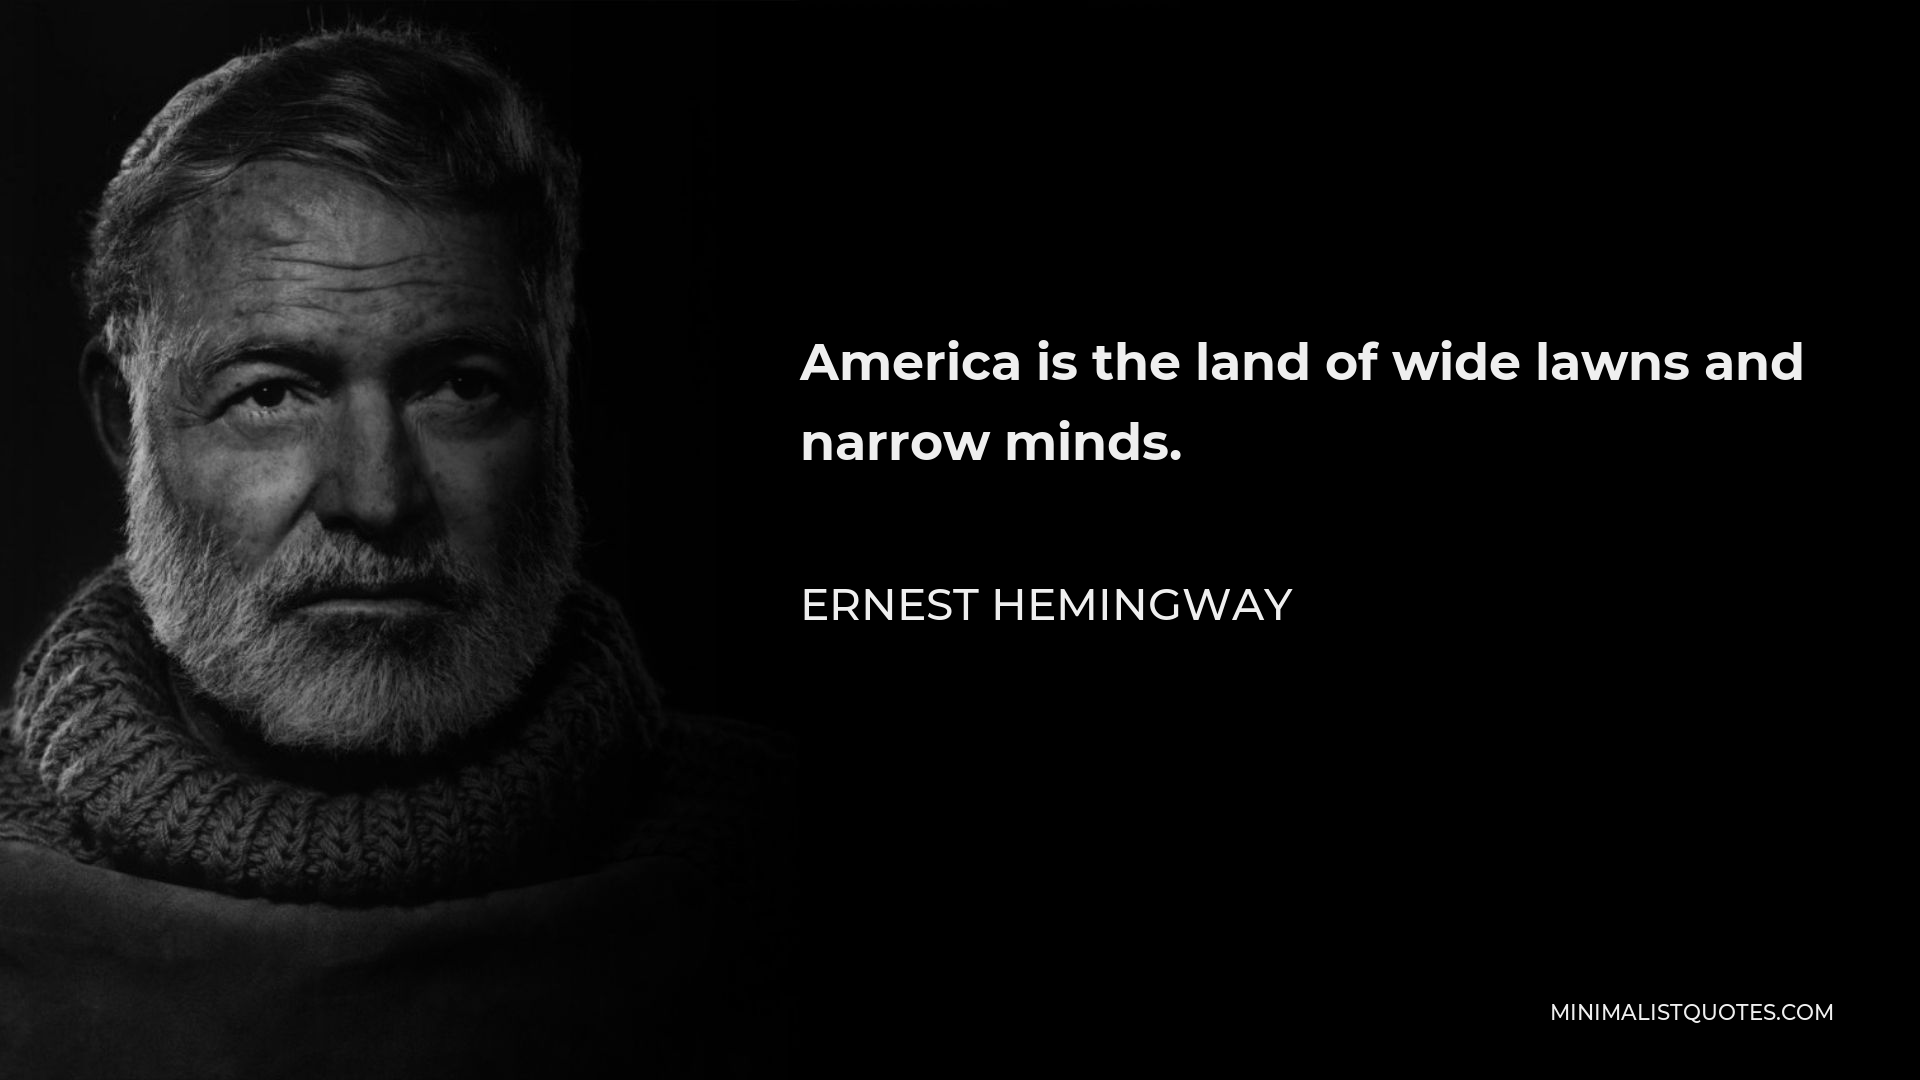 Ernest Hemingway Quote - America is the land of wide lawns and narrow minds.